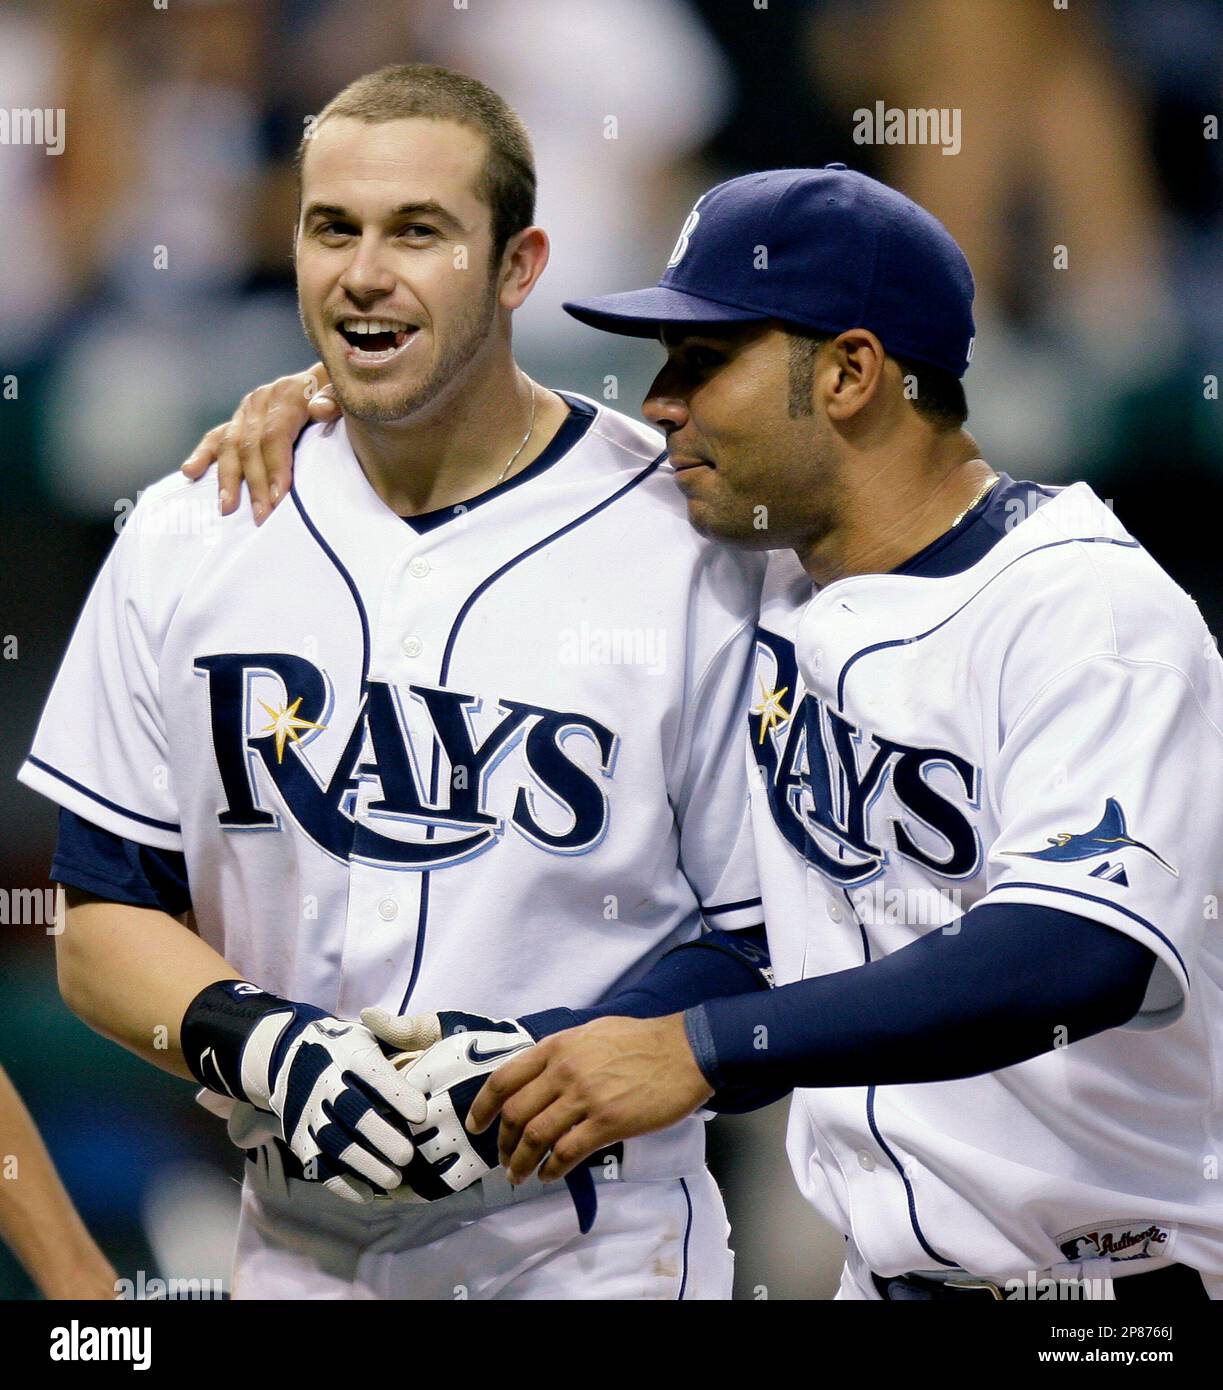 Tampa Bay Rays' Evan Longoria, left, celebrates with teammate Carlos Pena  after Longoria hit a two-run, game-winning home run off Boston Red Sox  pitcher Takashi Saito in the 13th inning of a